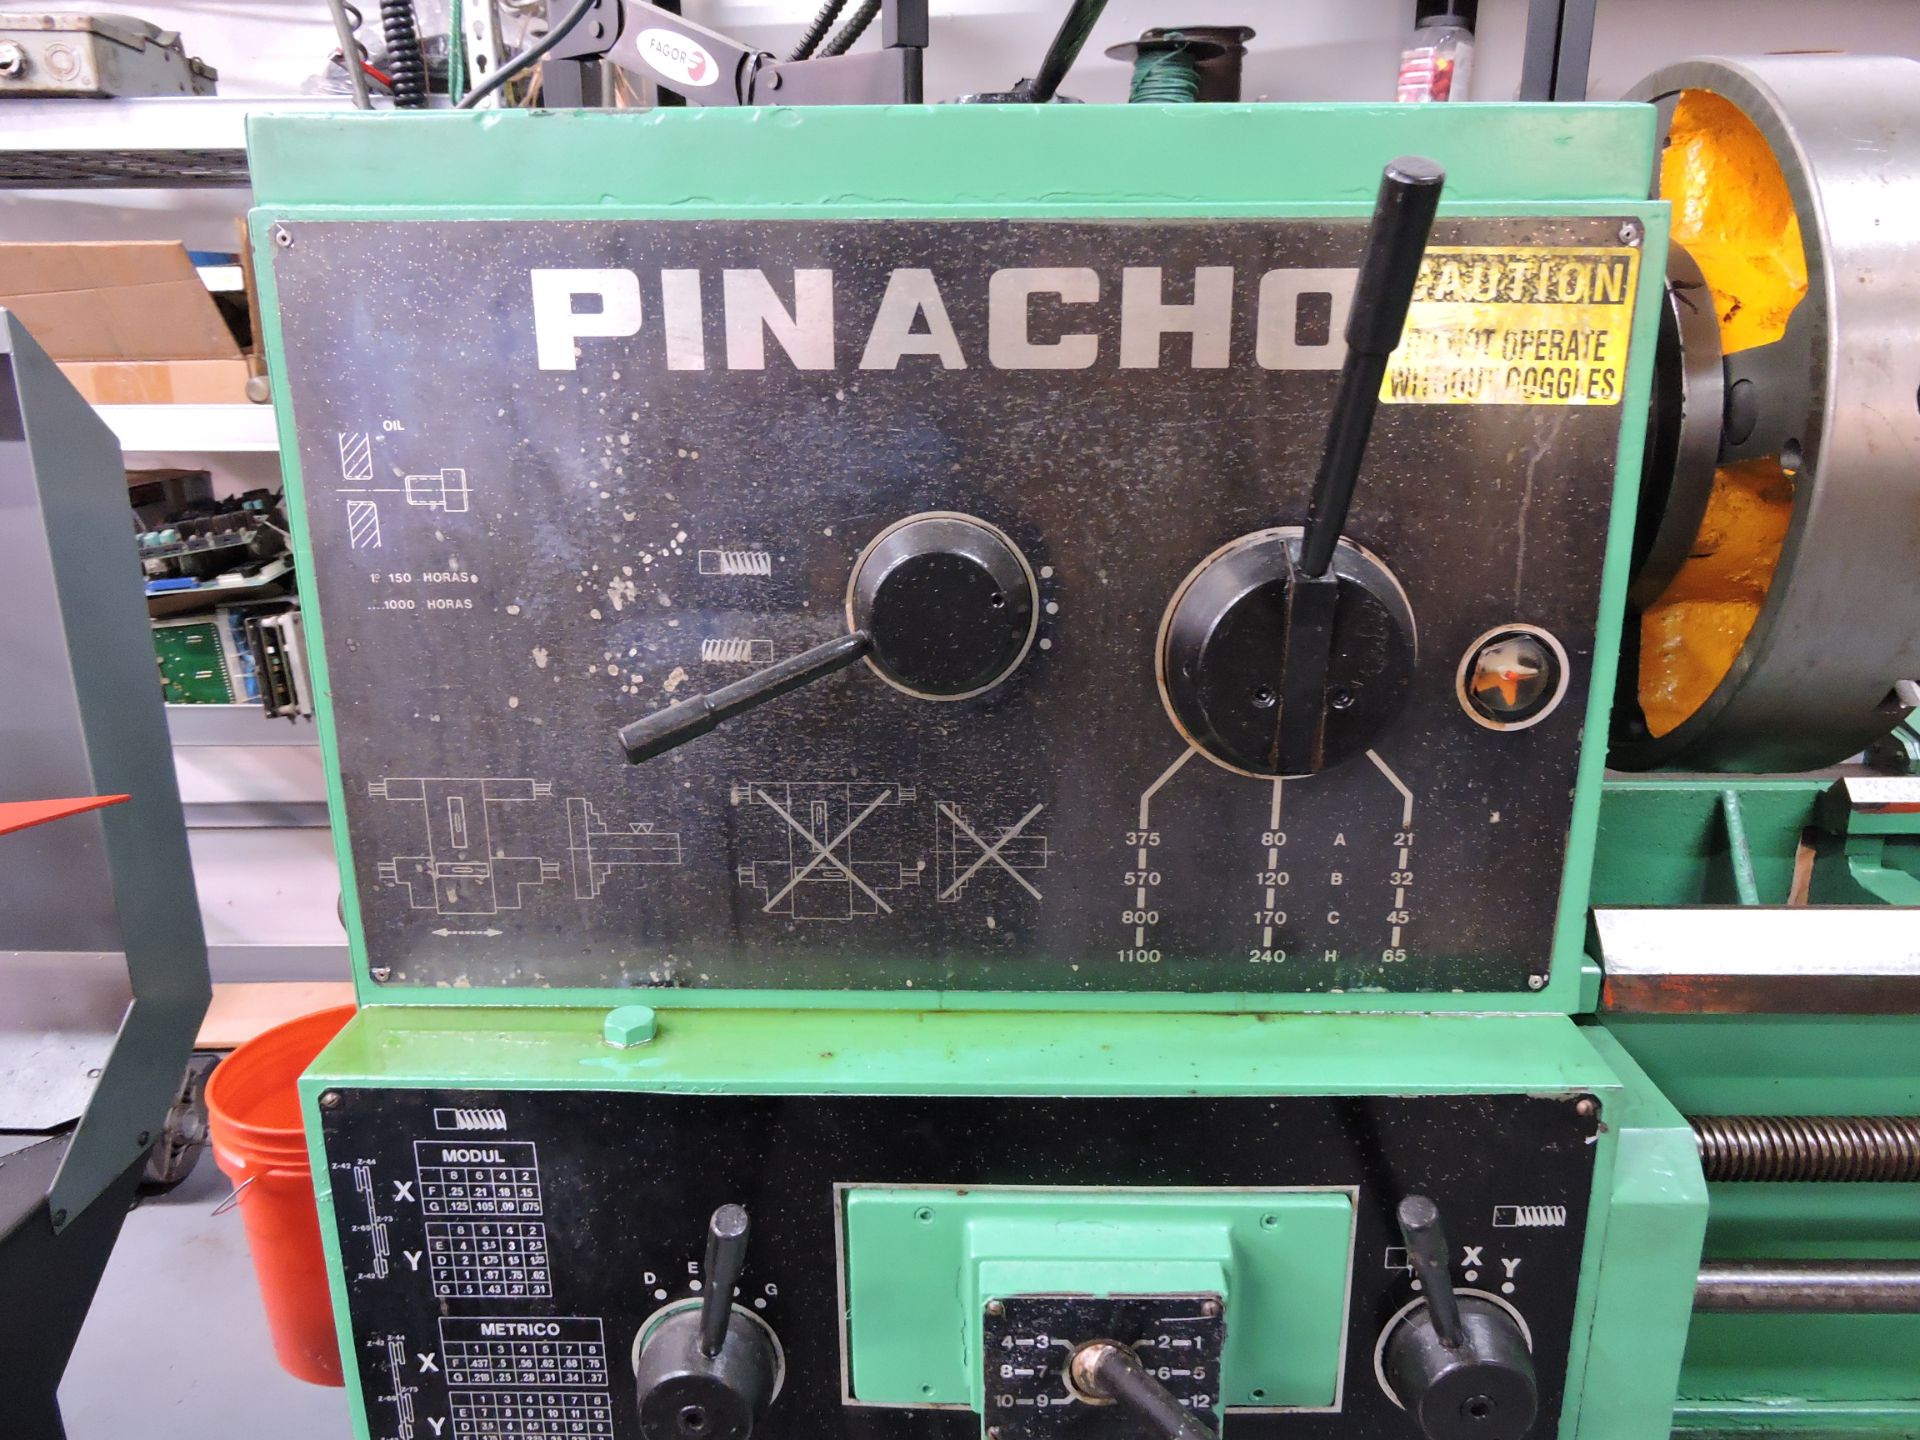 PANACHO LATINA L-1 260 TOOL ROOM LATHE; W/30" Swing Over Bed; 2.6" Spindle Bore; 39" Swing In Gap; - Image 3 of 6